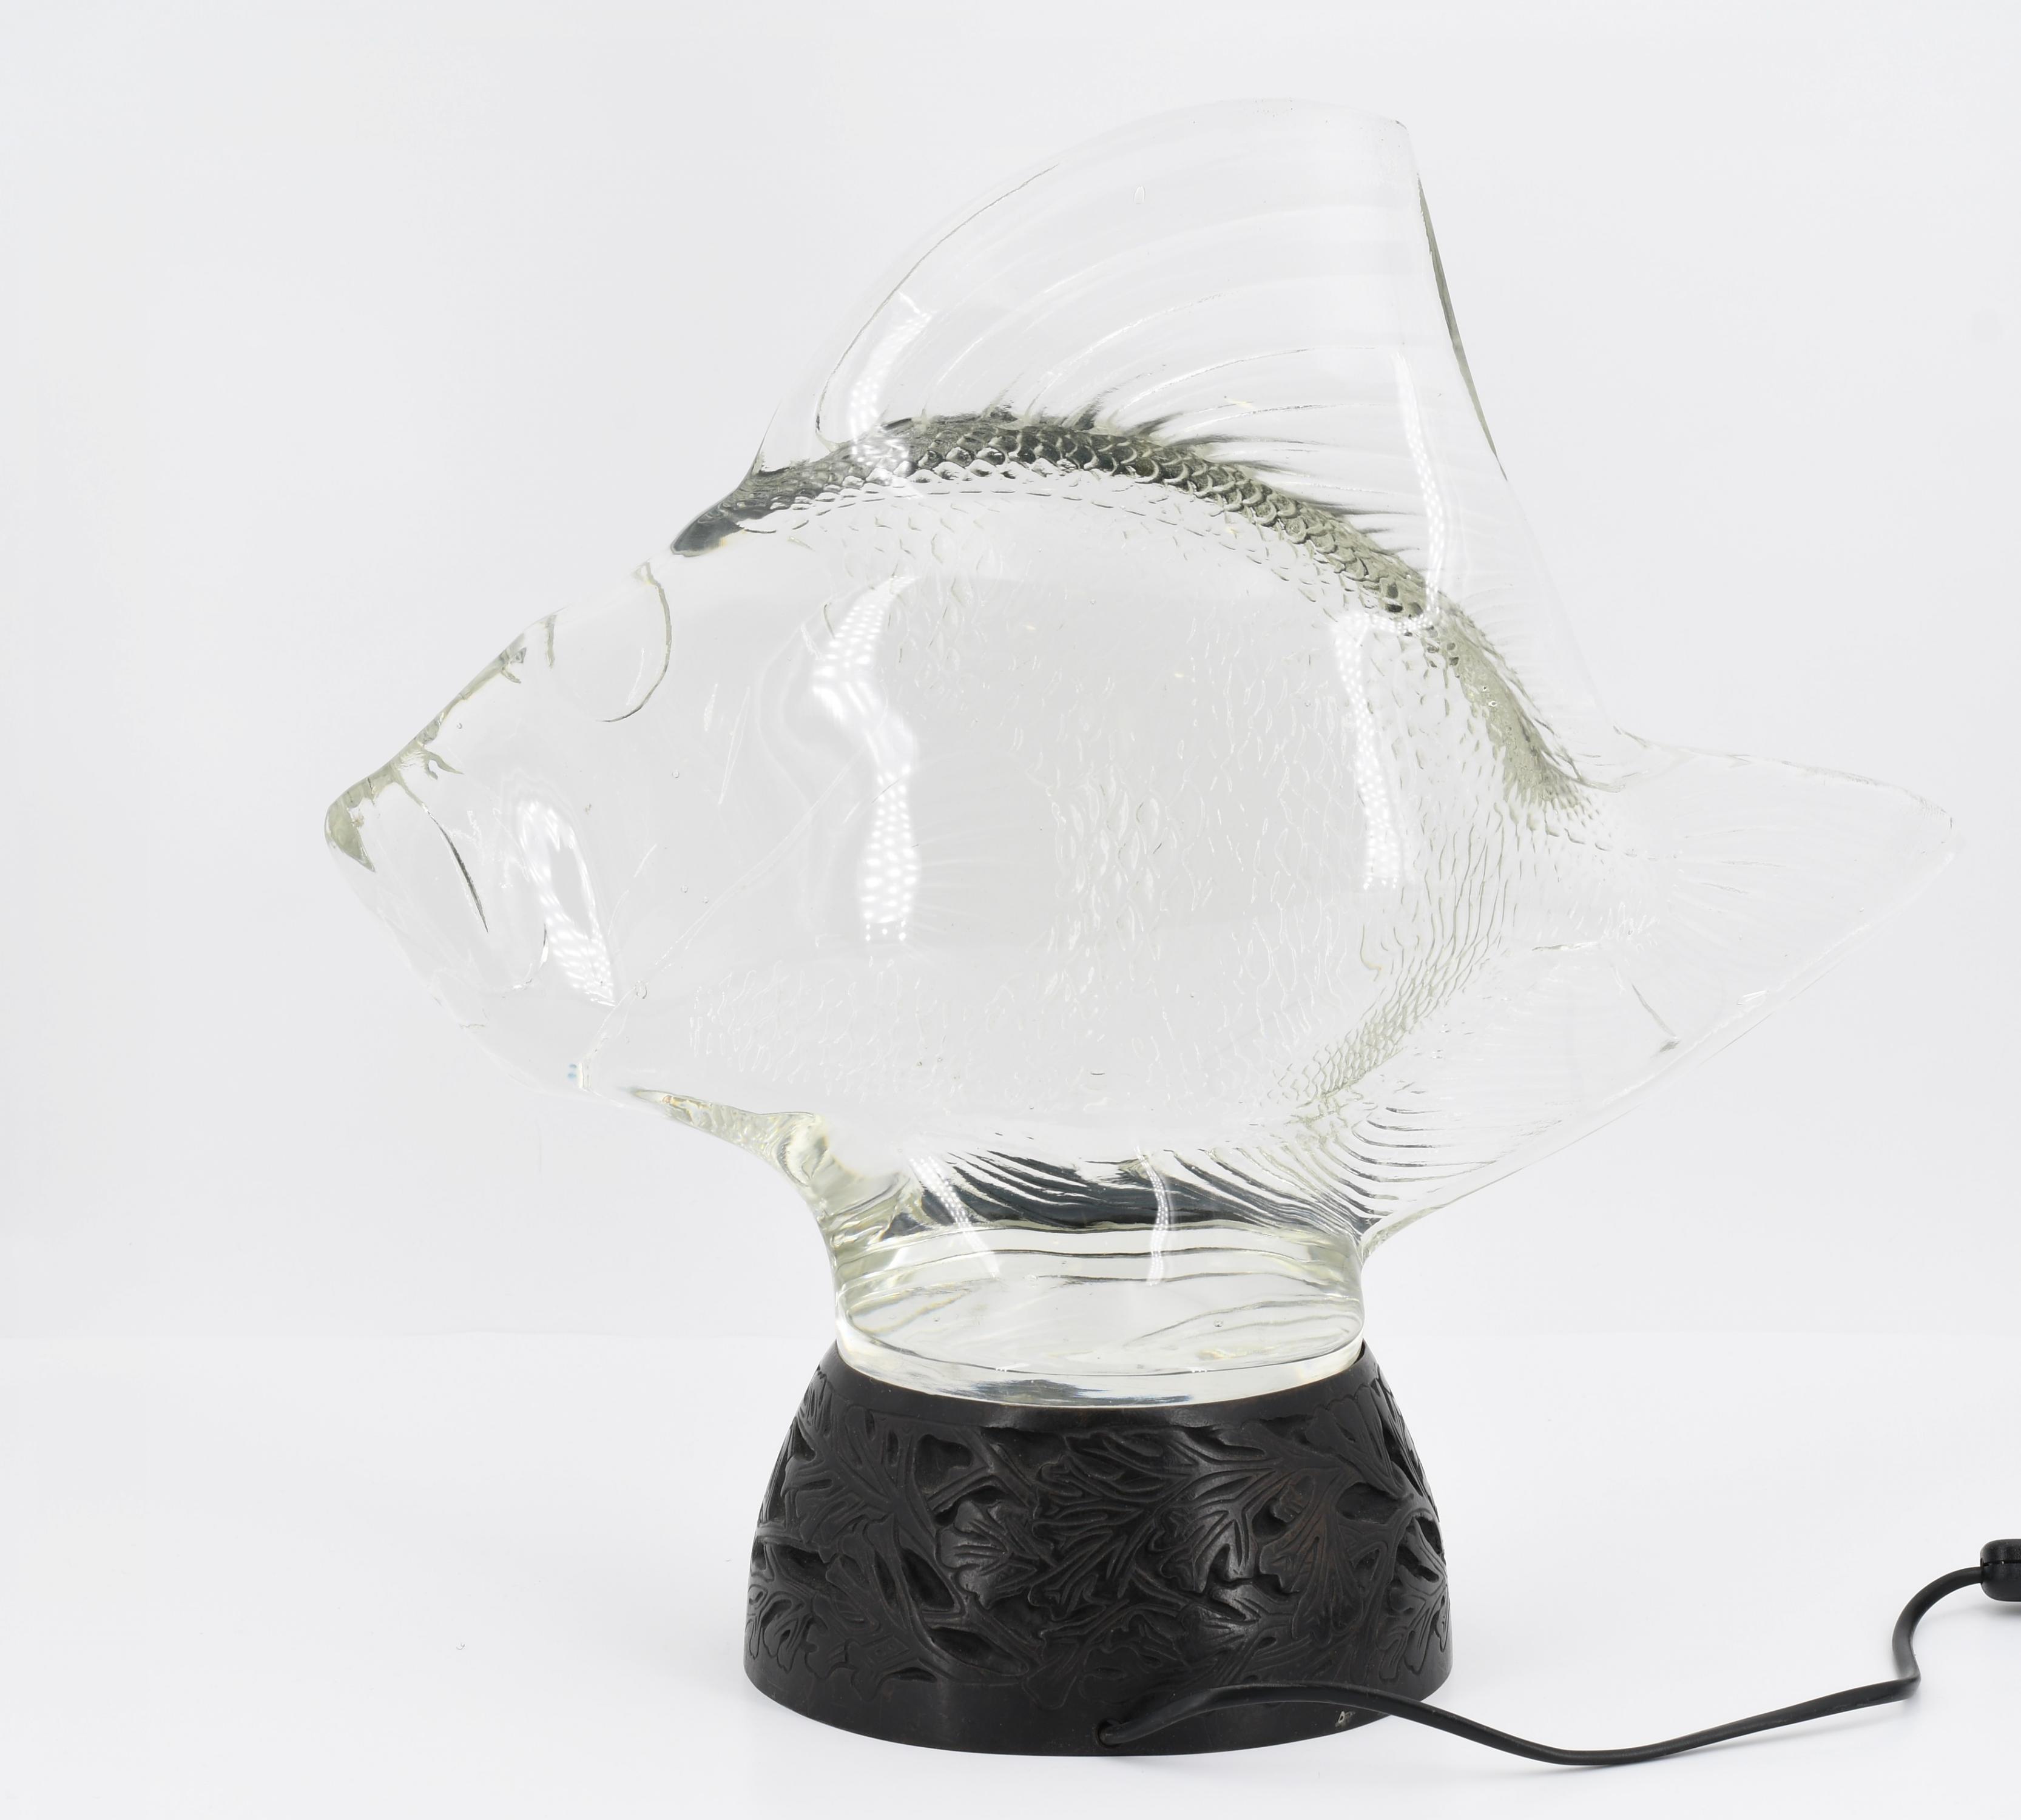 Table lamp "Gros Poisson, Vagues" - Image 4 of 6